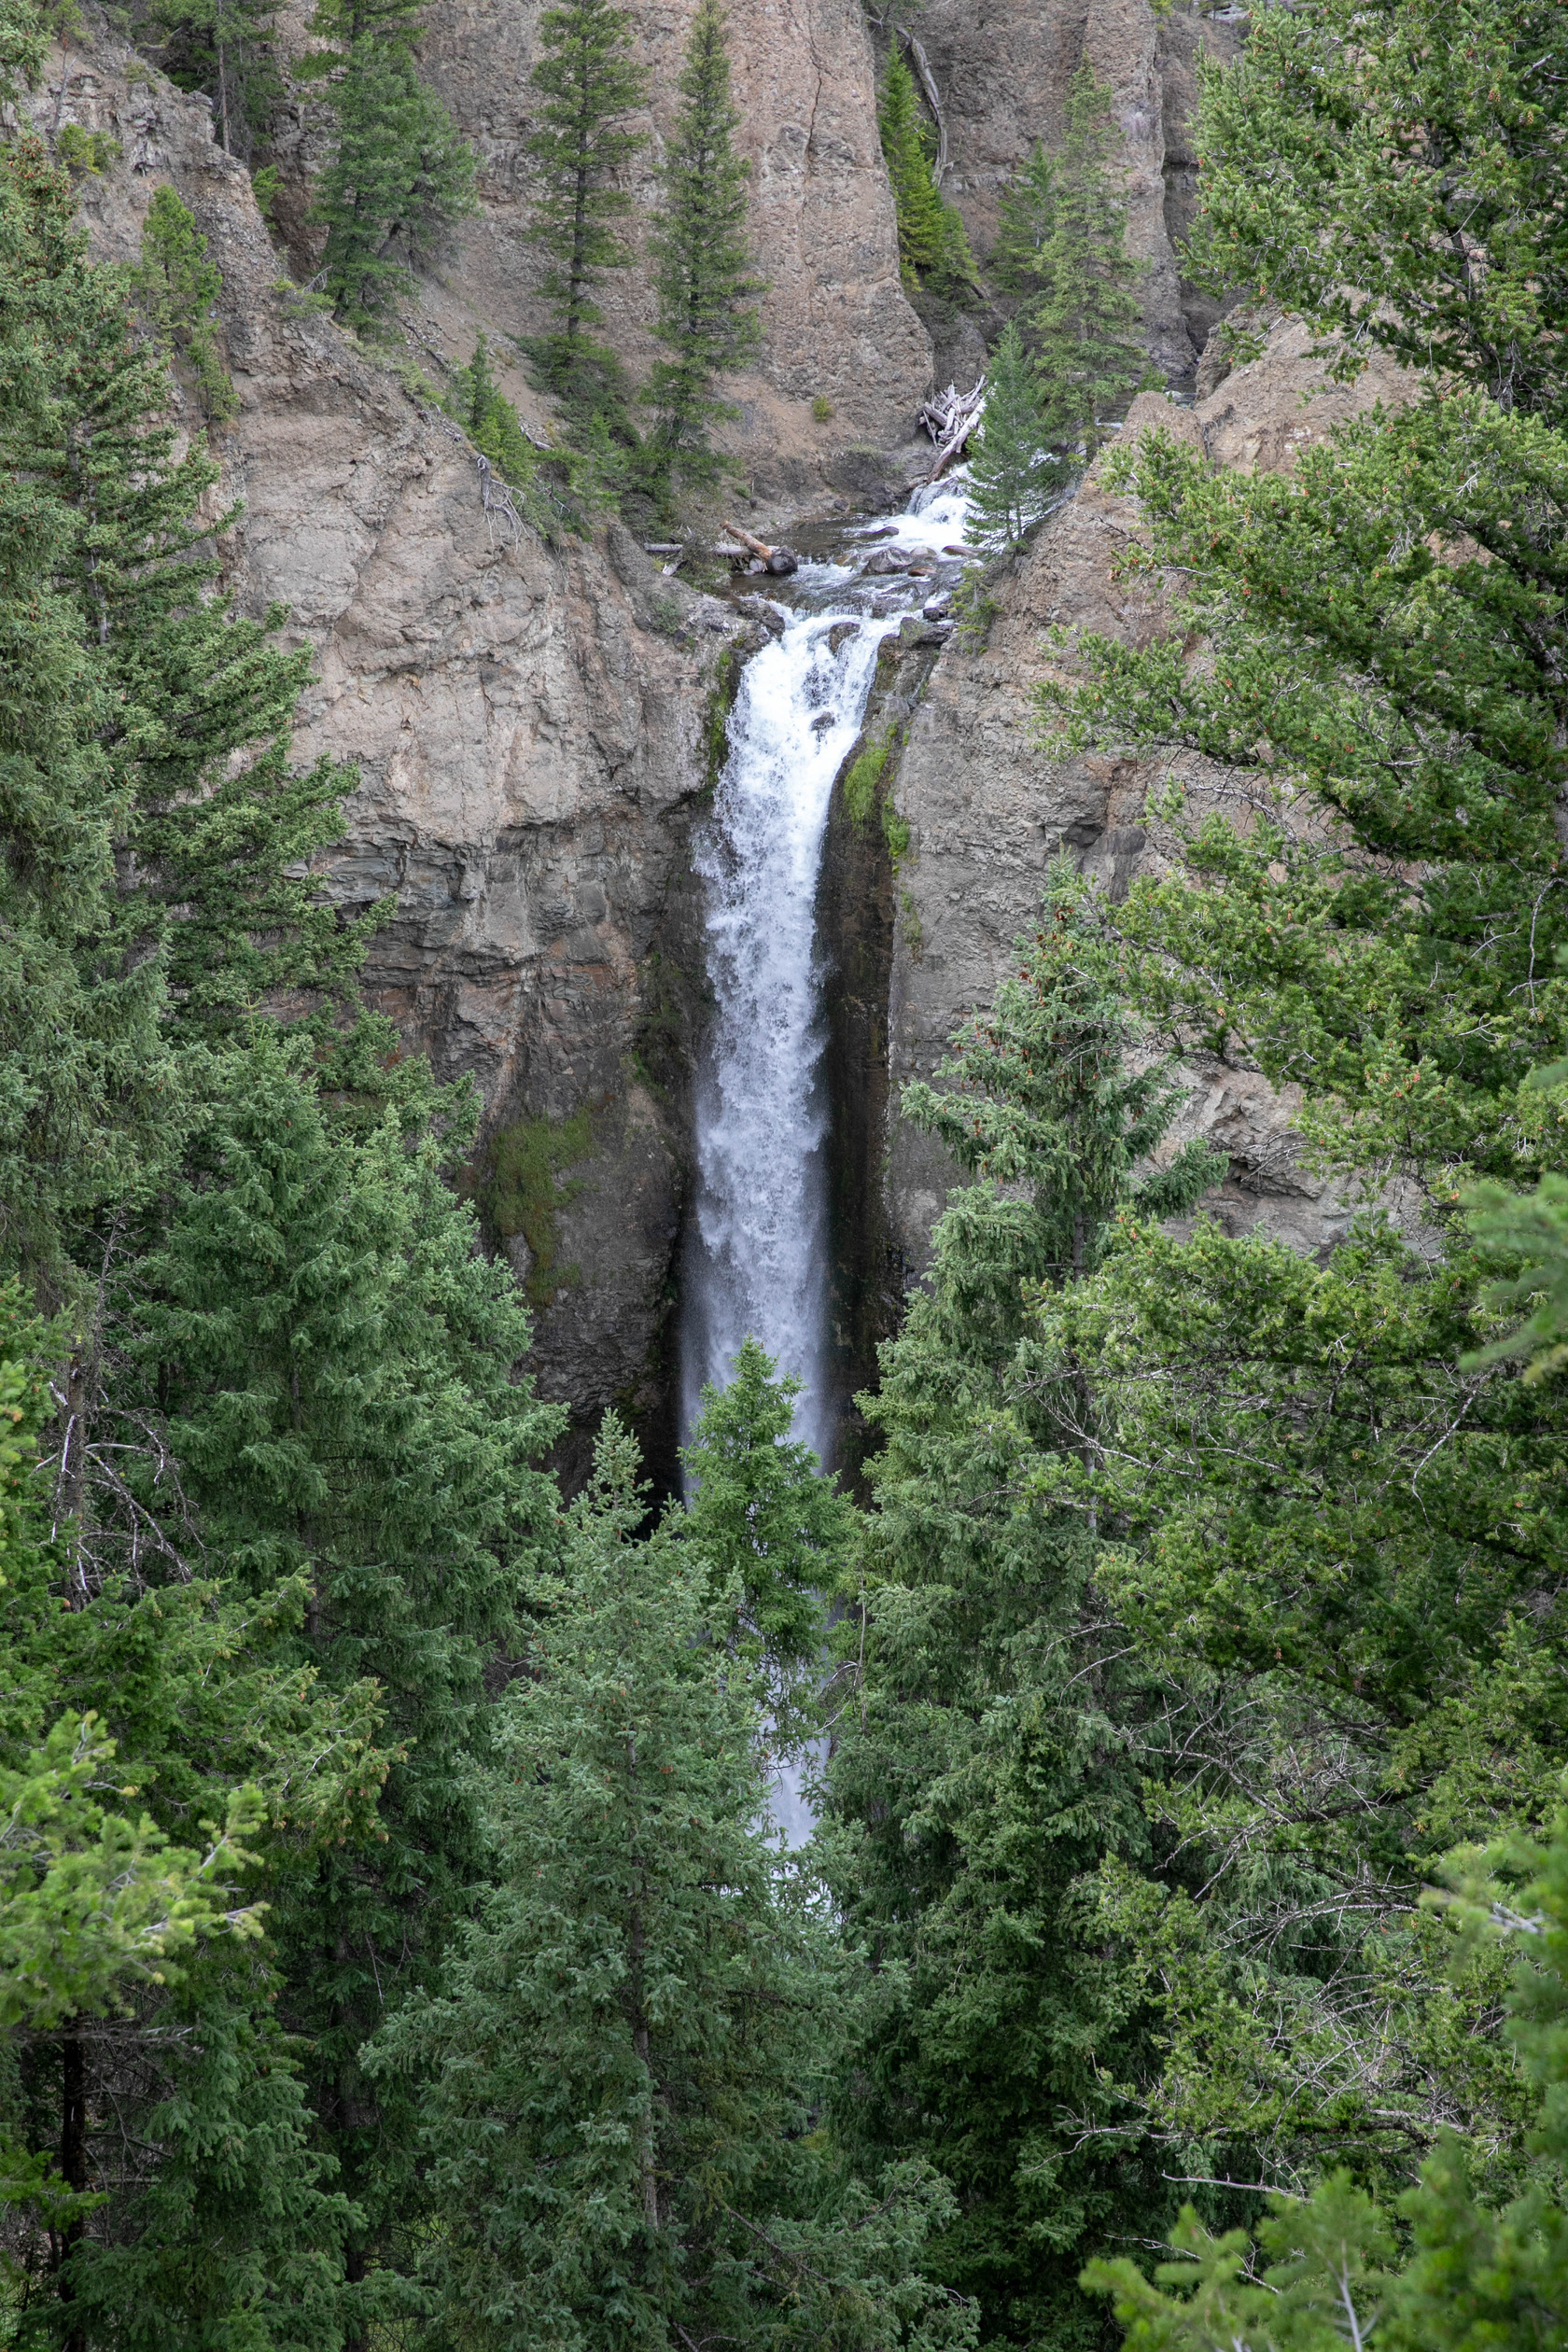 The waterfall flows over an eroded cliff and is narrow and tall.